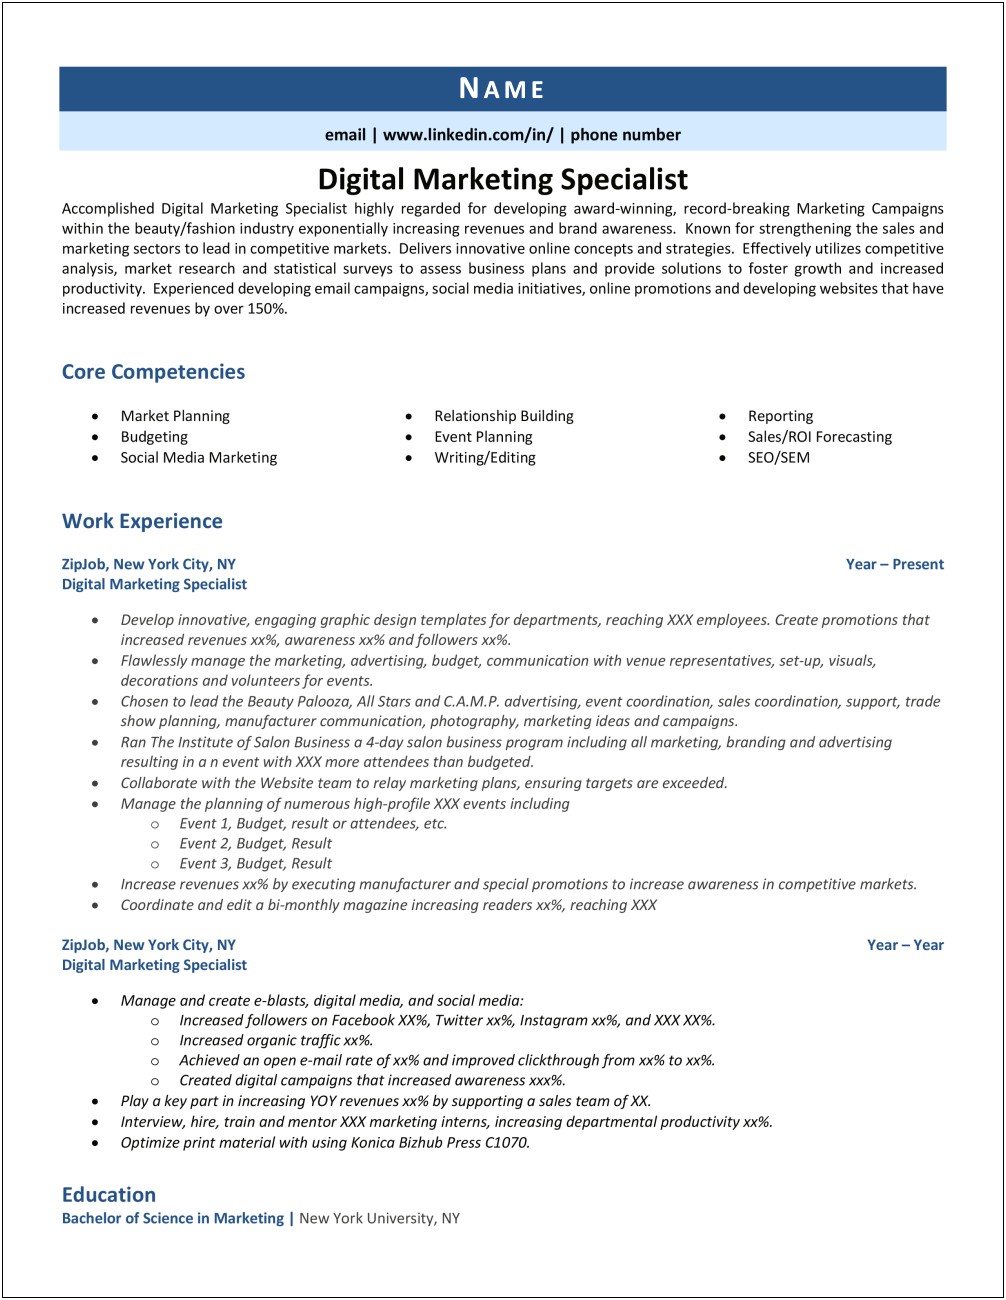 Digital Marketing Specialist 1 Year Experience Resume Example